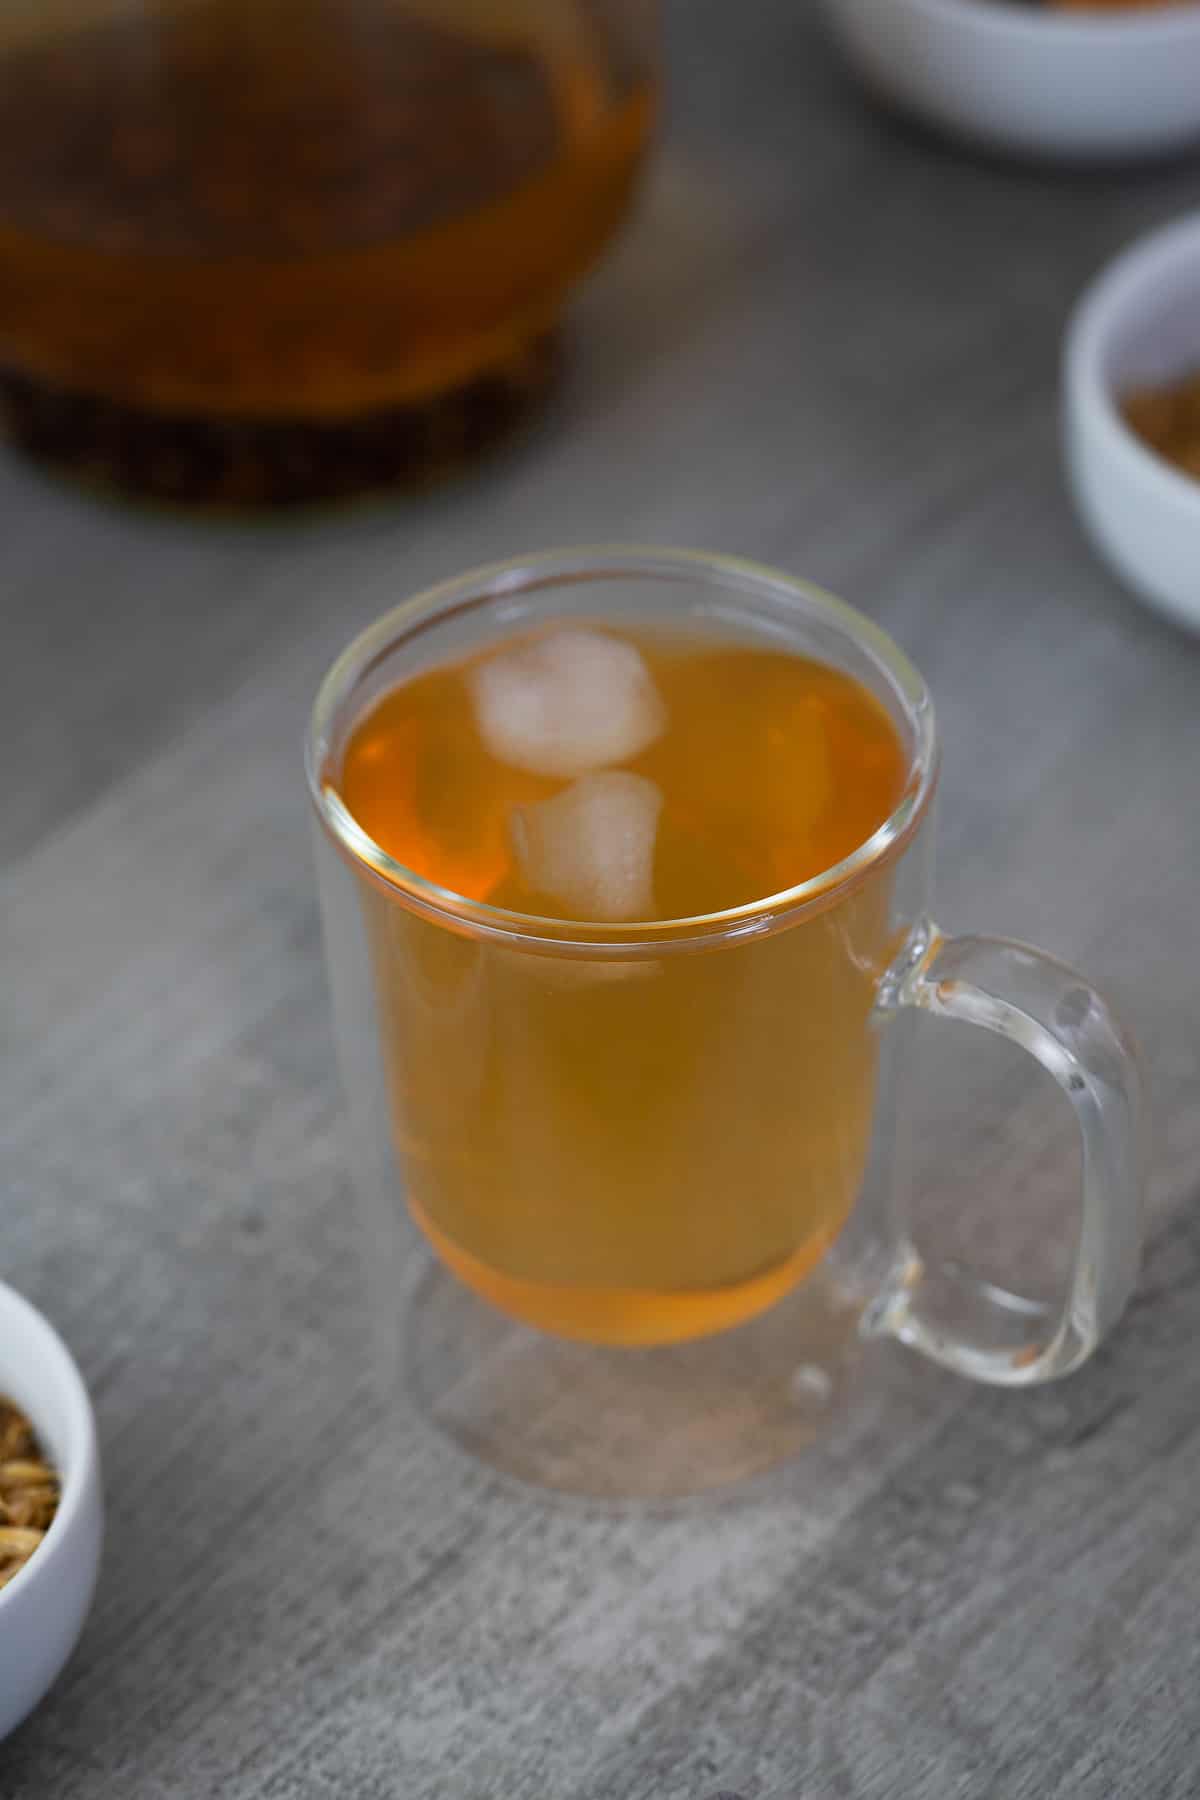 Barley Tea served with ice cubes with roasted barley kernels nearby.